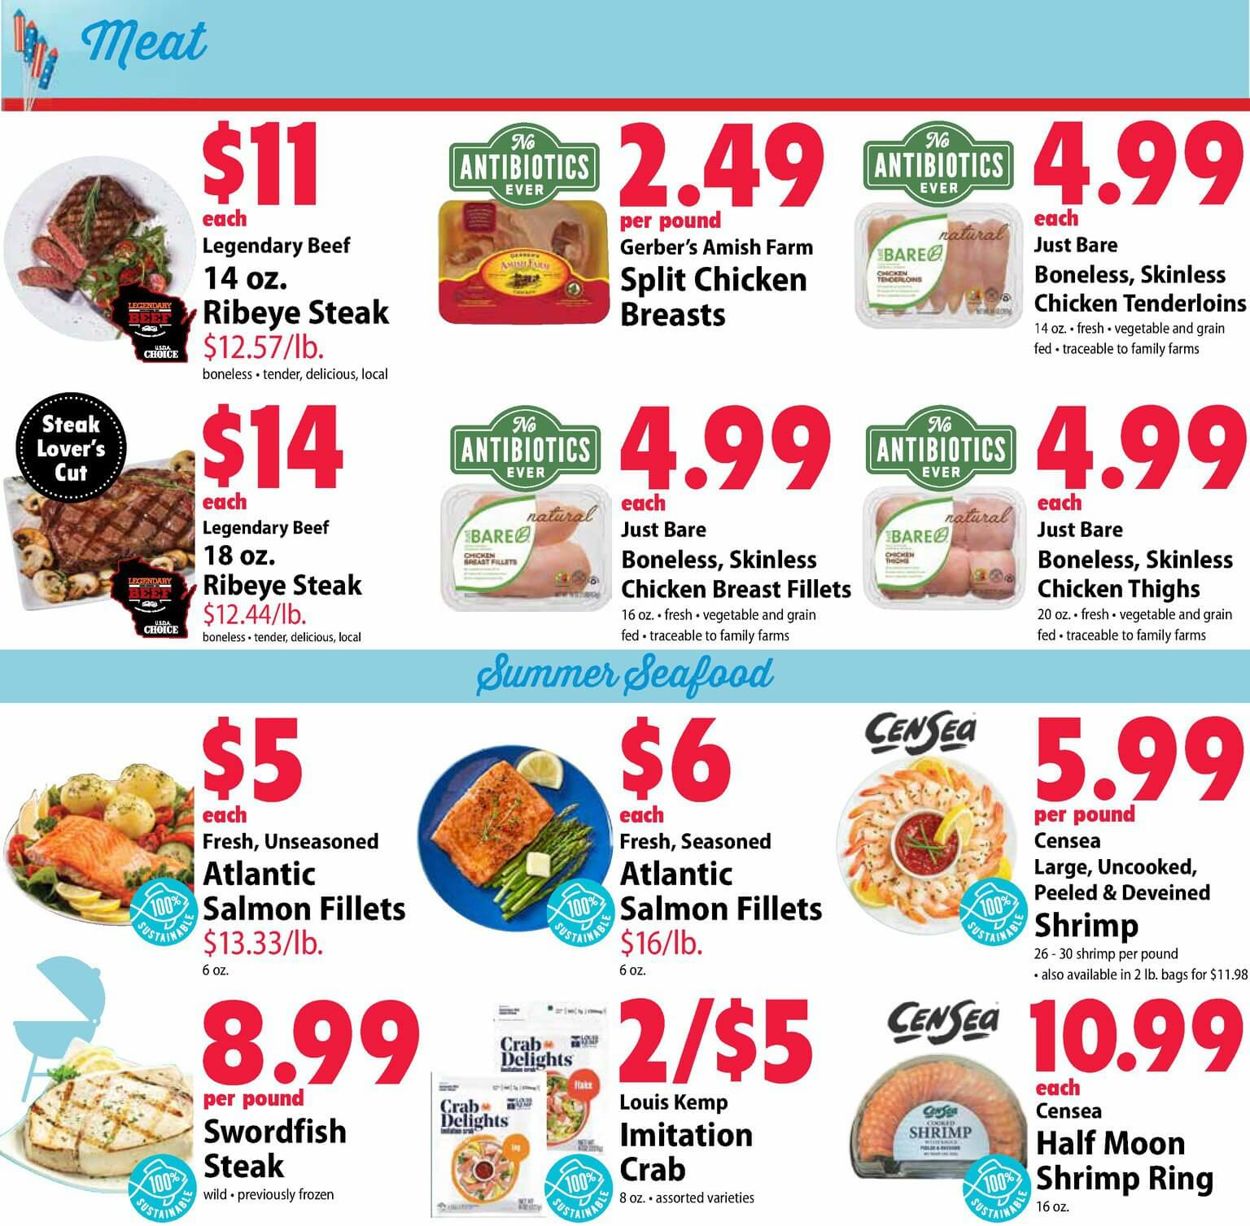 Festival Foods Current weekly ad 06/26 - 07/02/2019 [6] - frequent-ads.com